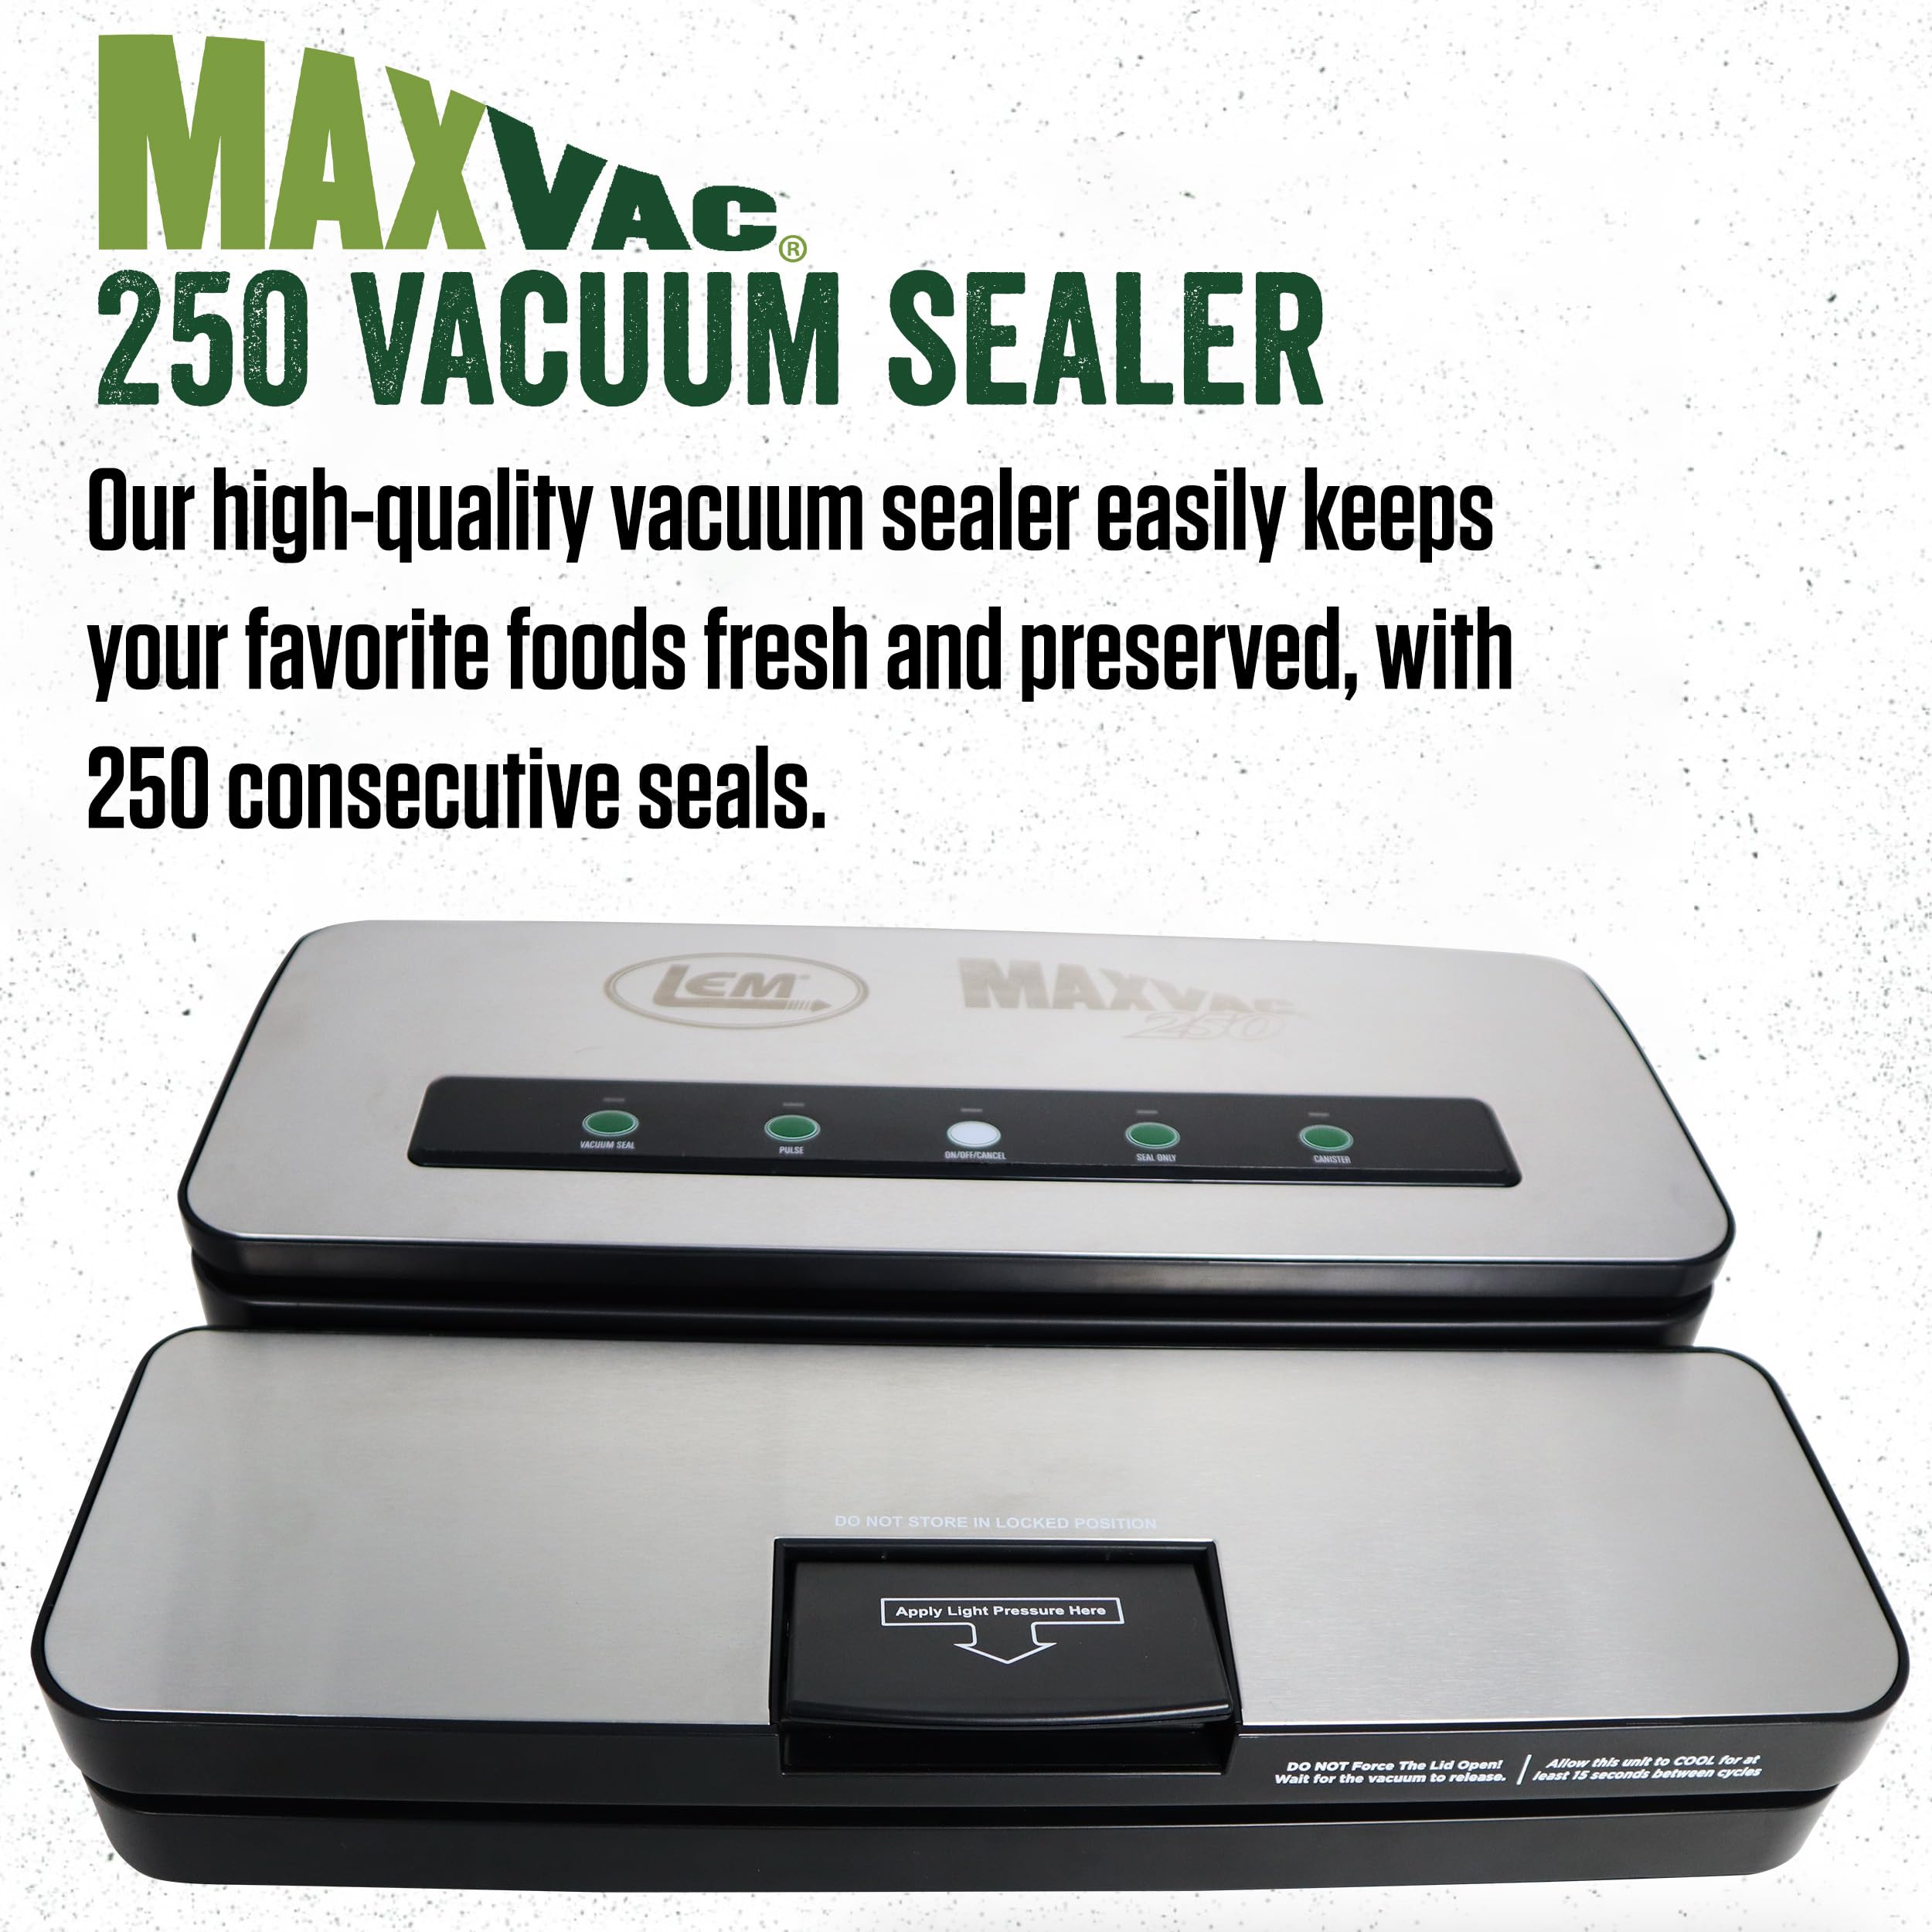 LEM Products MaxVac 250 Stainless Steel Vacuum Sealer with Built-In Bag Holder and Cutter, Silver and Black